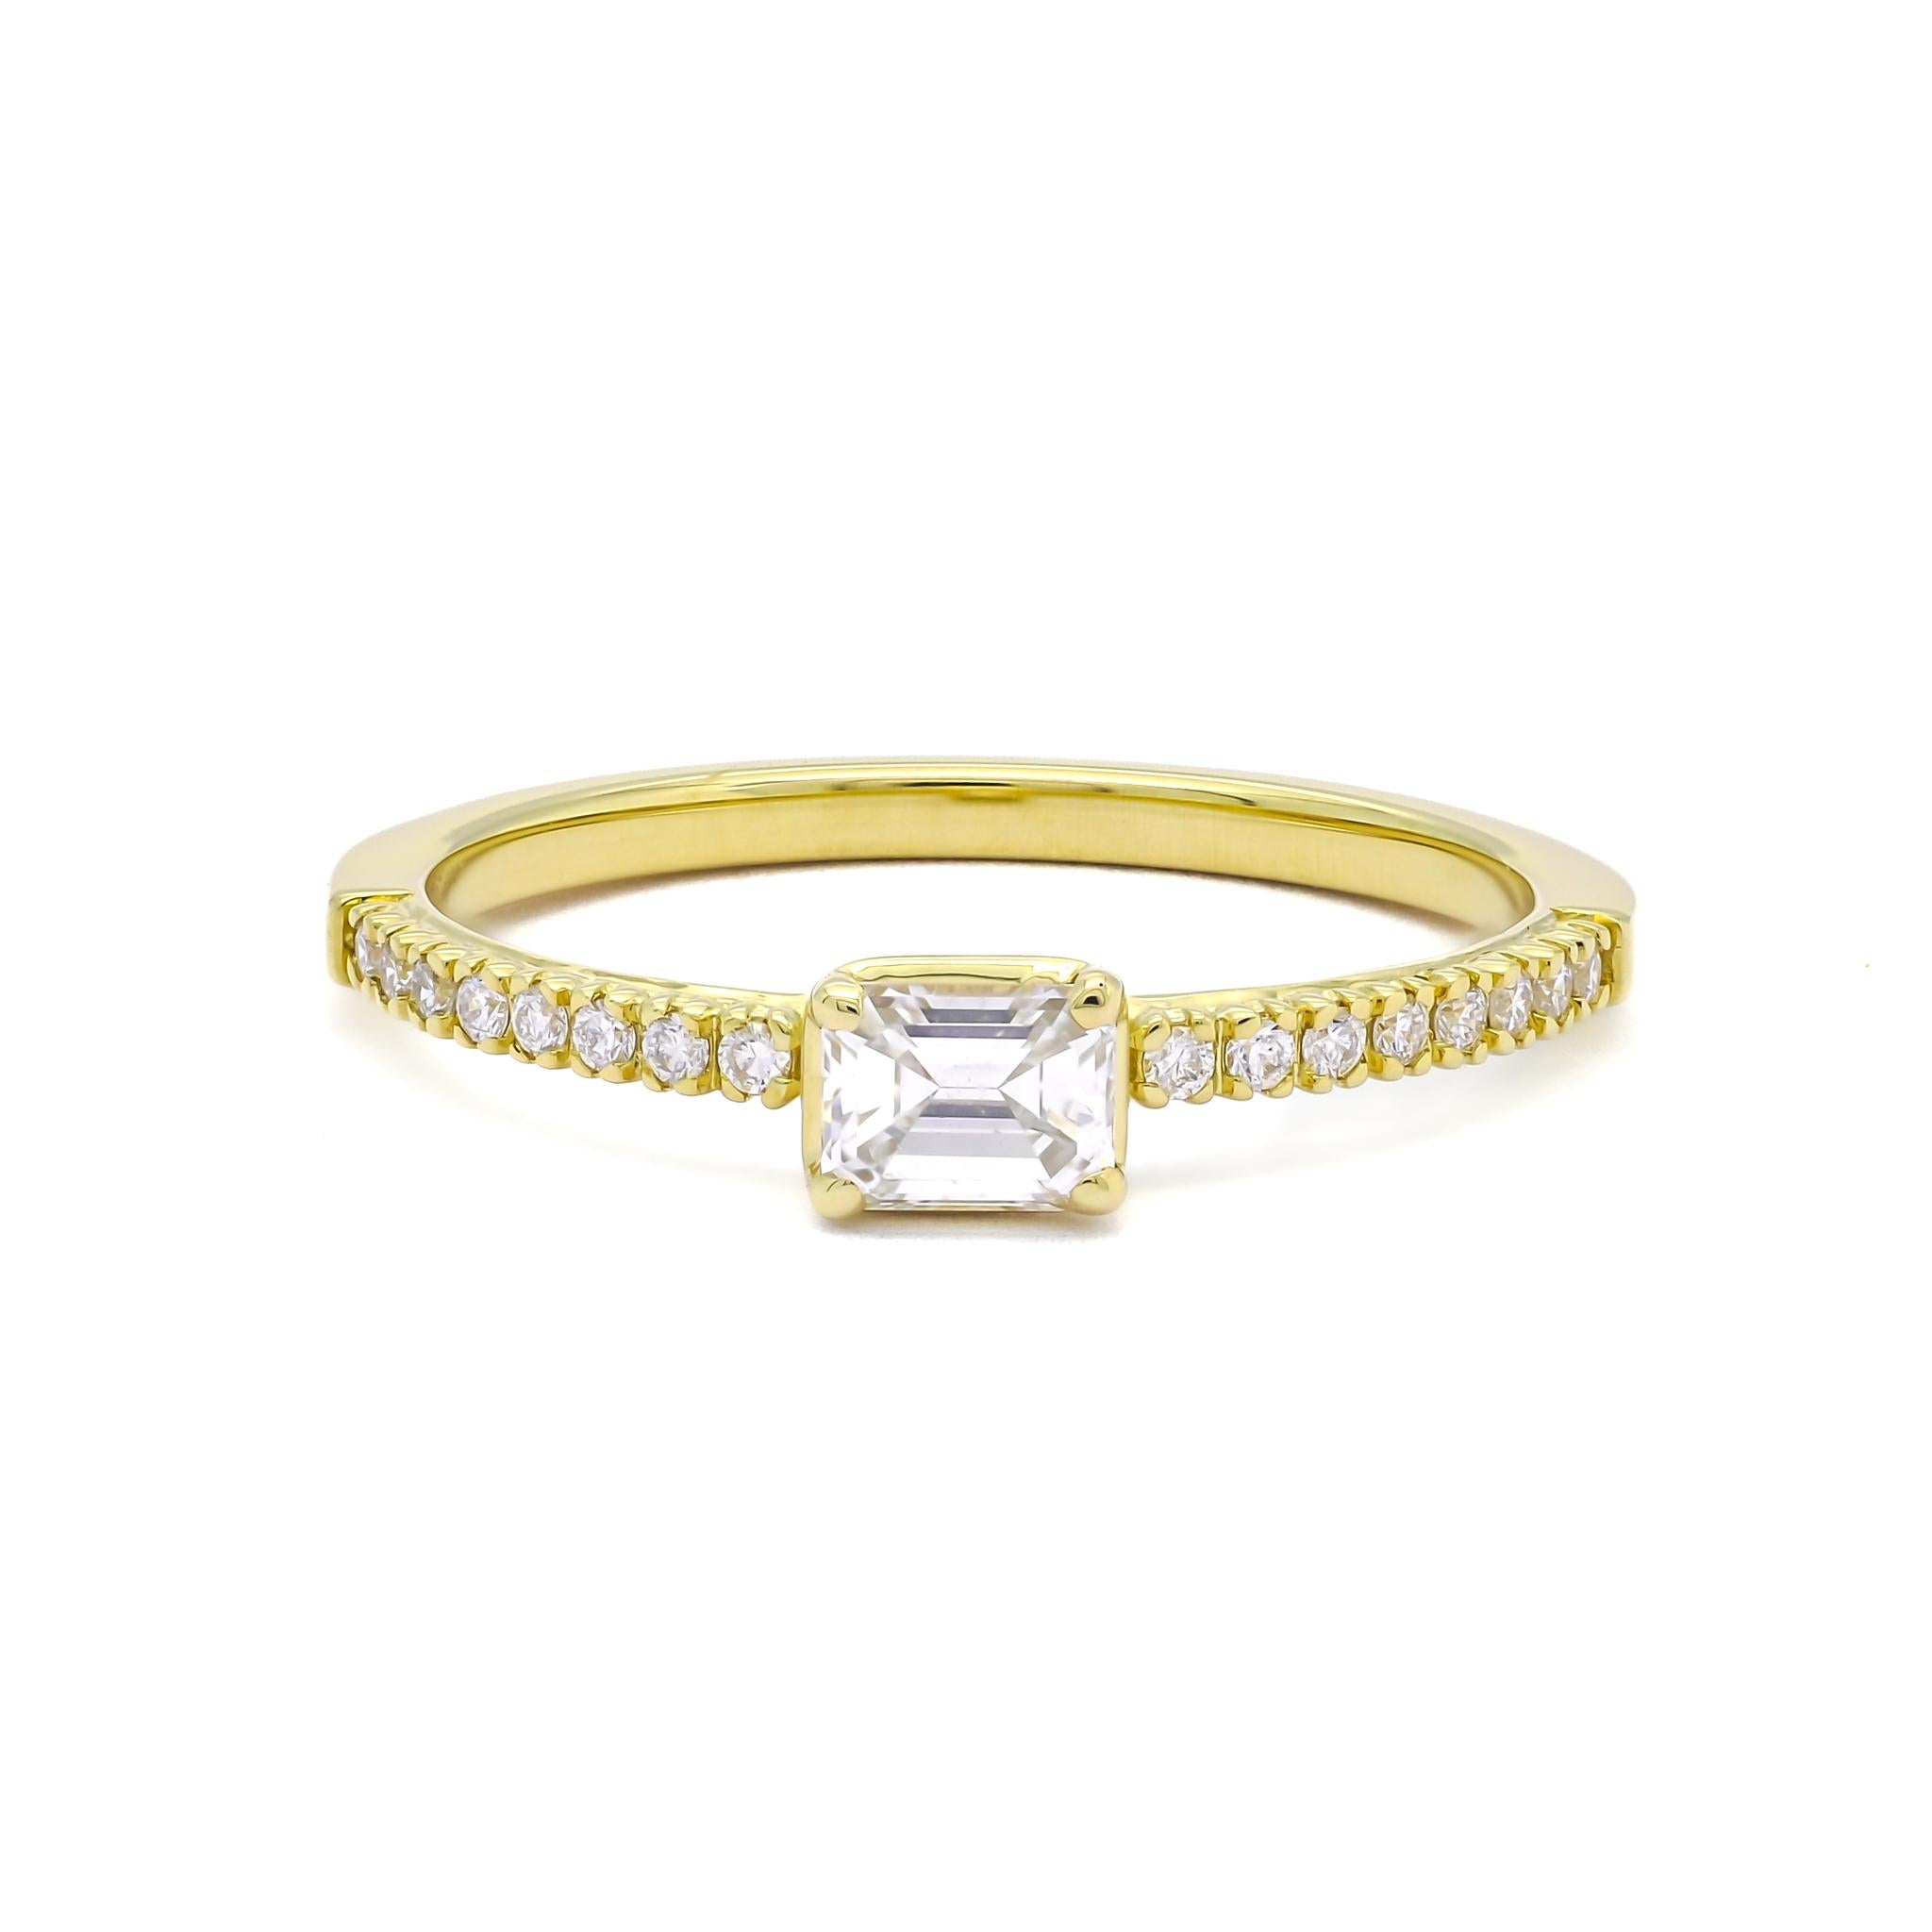 Embodying celestial elegance, this exquisite Emerald Cut Solitaire Ring in 18K Yellow Gold boasts a mesmerizing 0.25 carat Emerald, capturing the essence of timeless sophistication. 

Crafted with utmost precision and skill, the enchanting Emerald